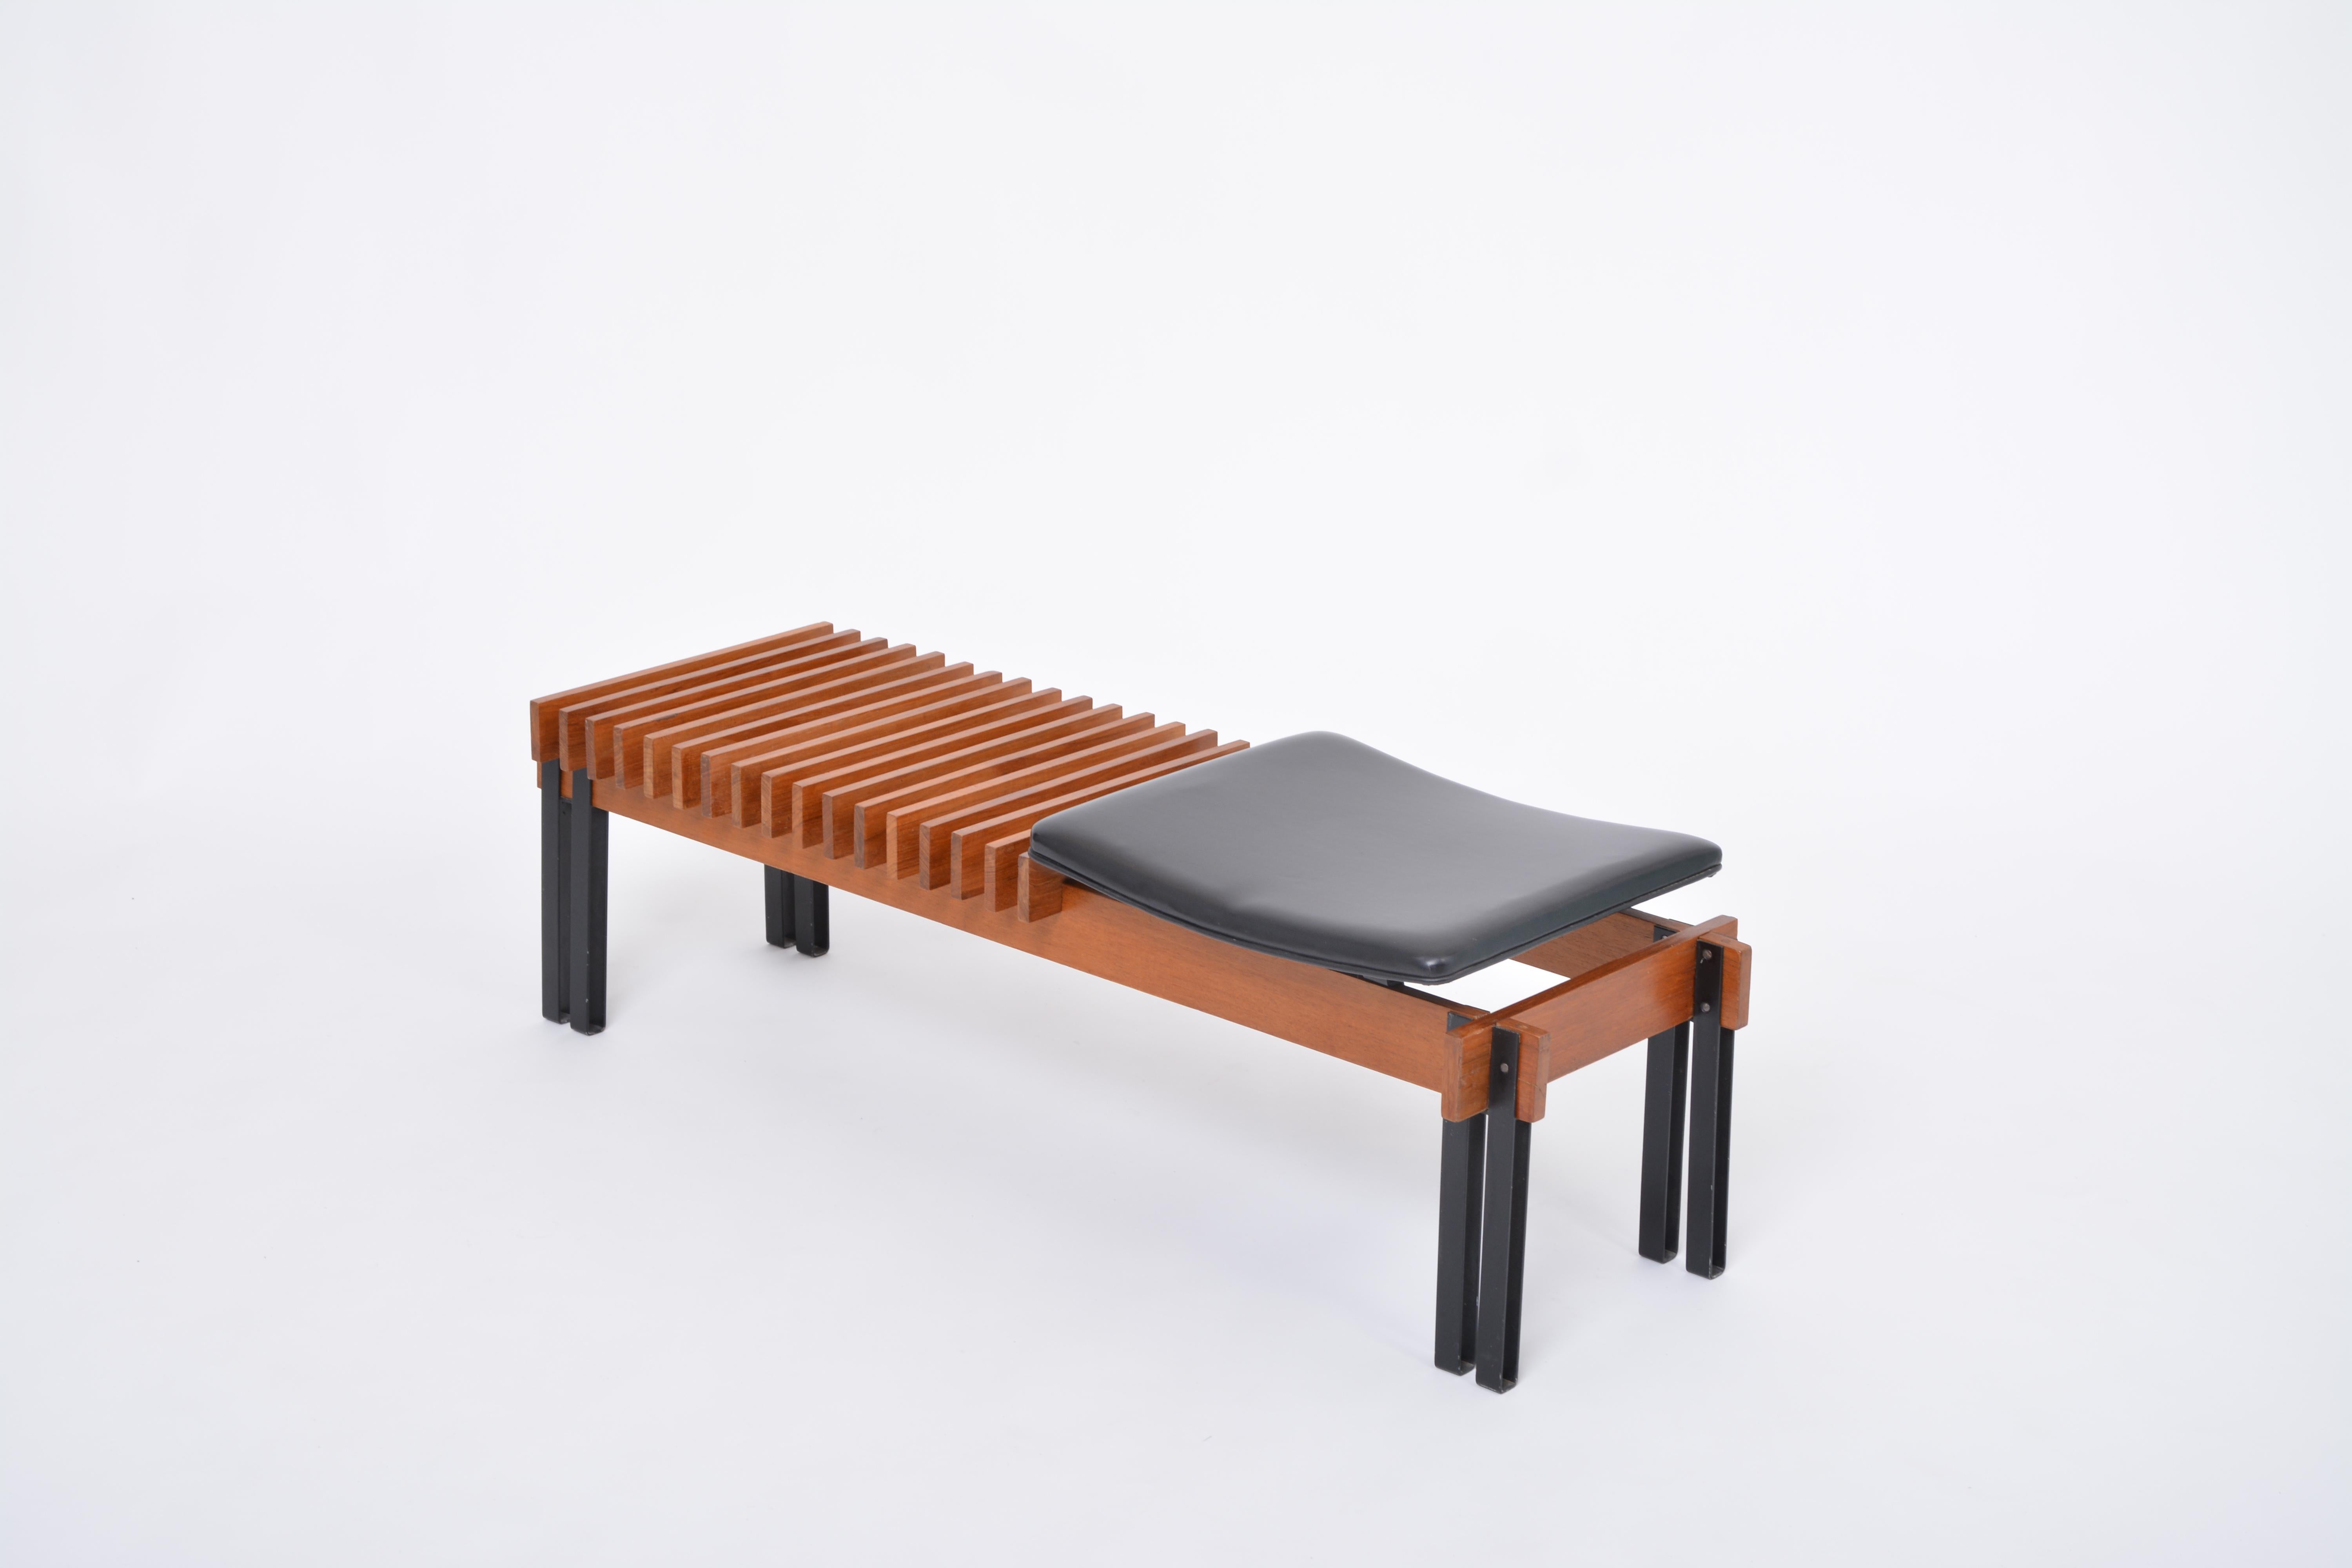 Metal Mid-Century Modern slatted Teak bench by Inge and Luciano Rubino for Apec For Sale